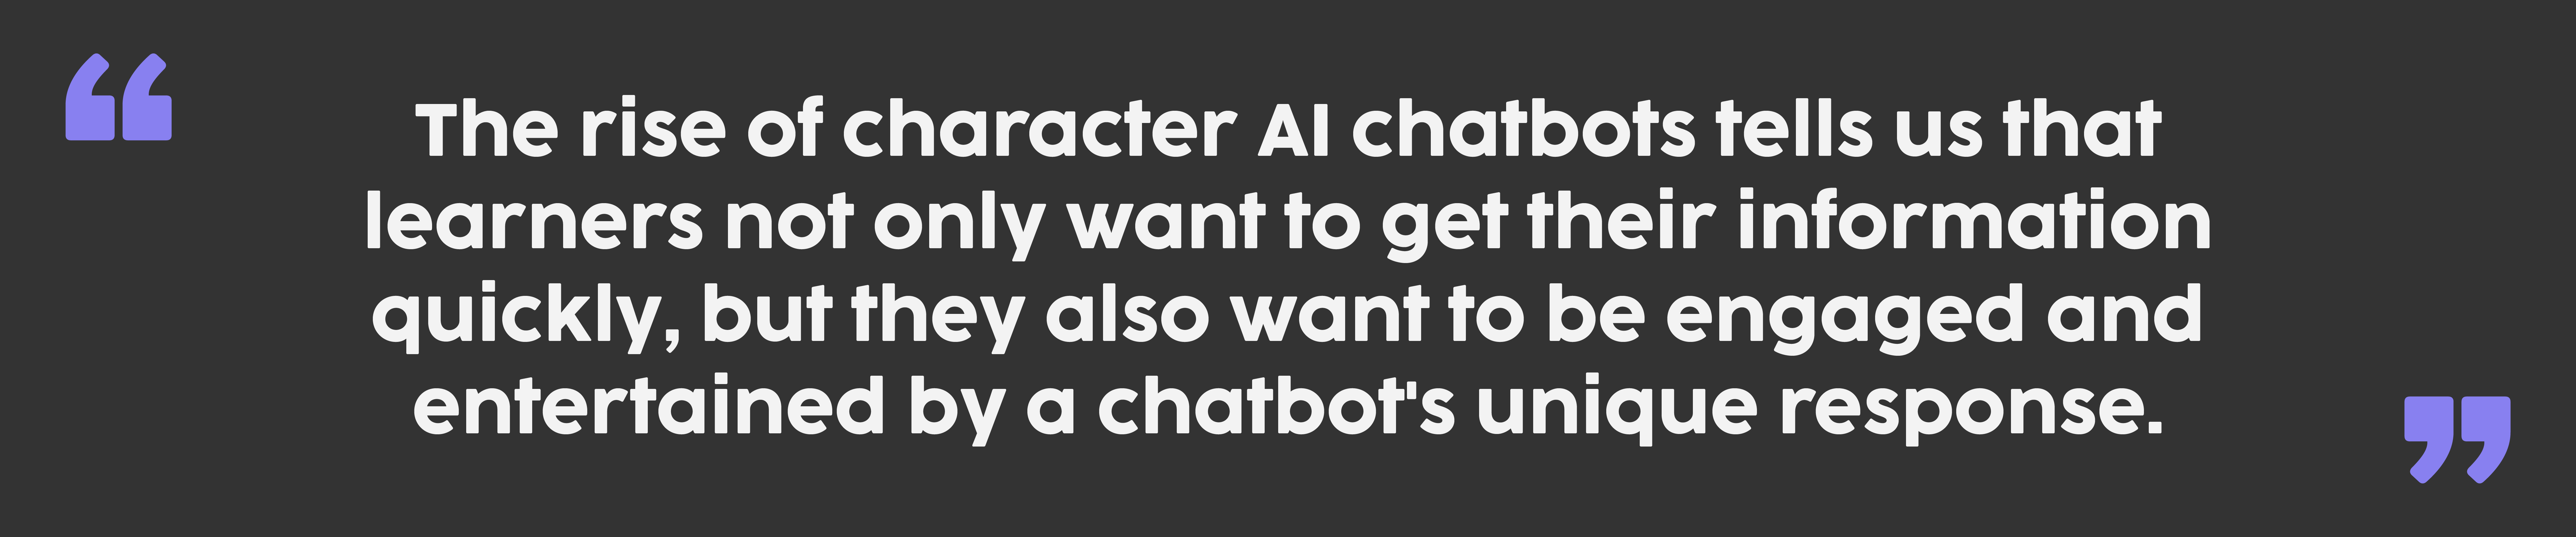 Chatbots can help with personalised learning